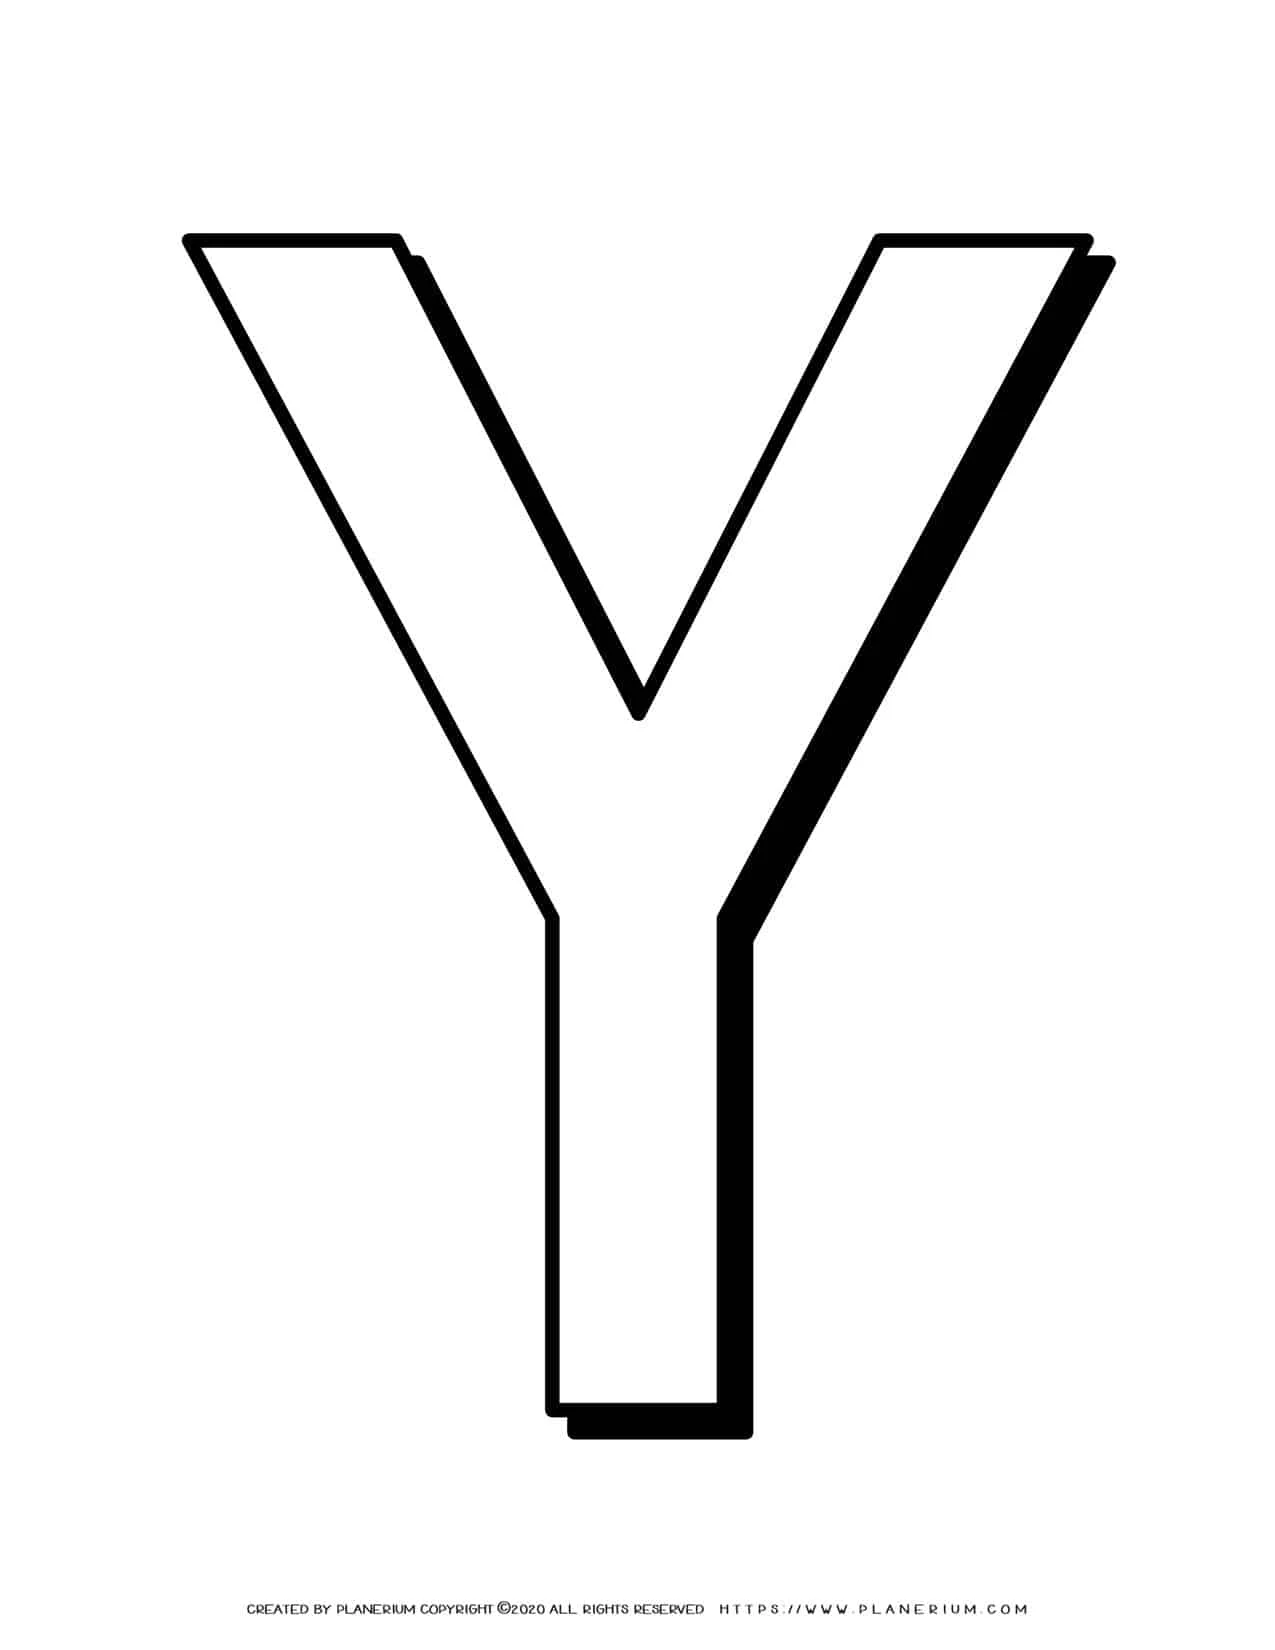 The Letter Y in the English Alphabet